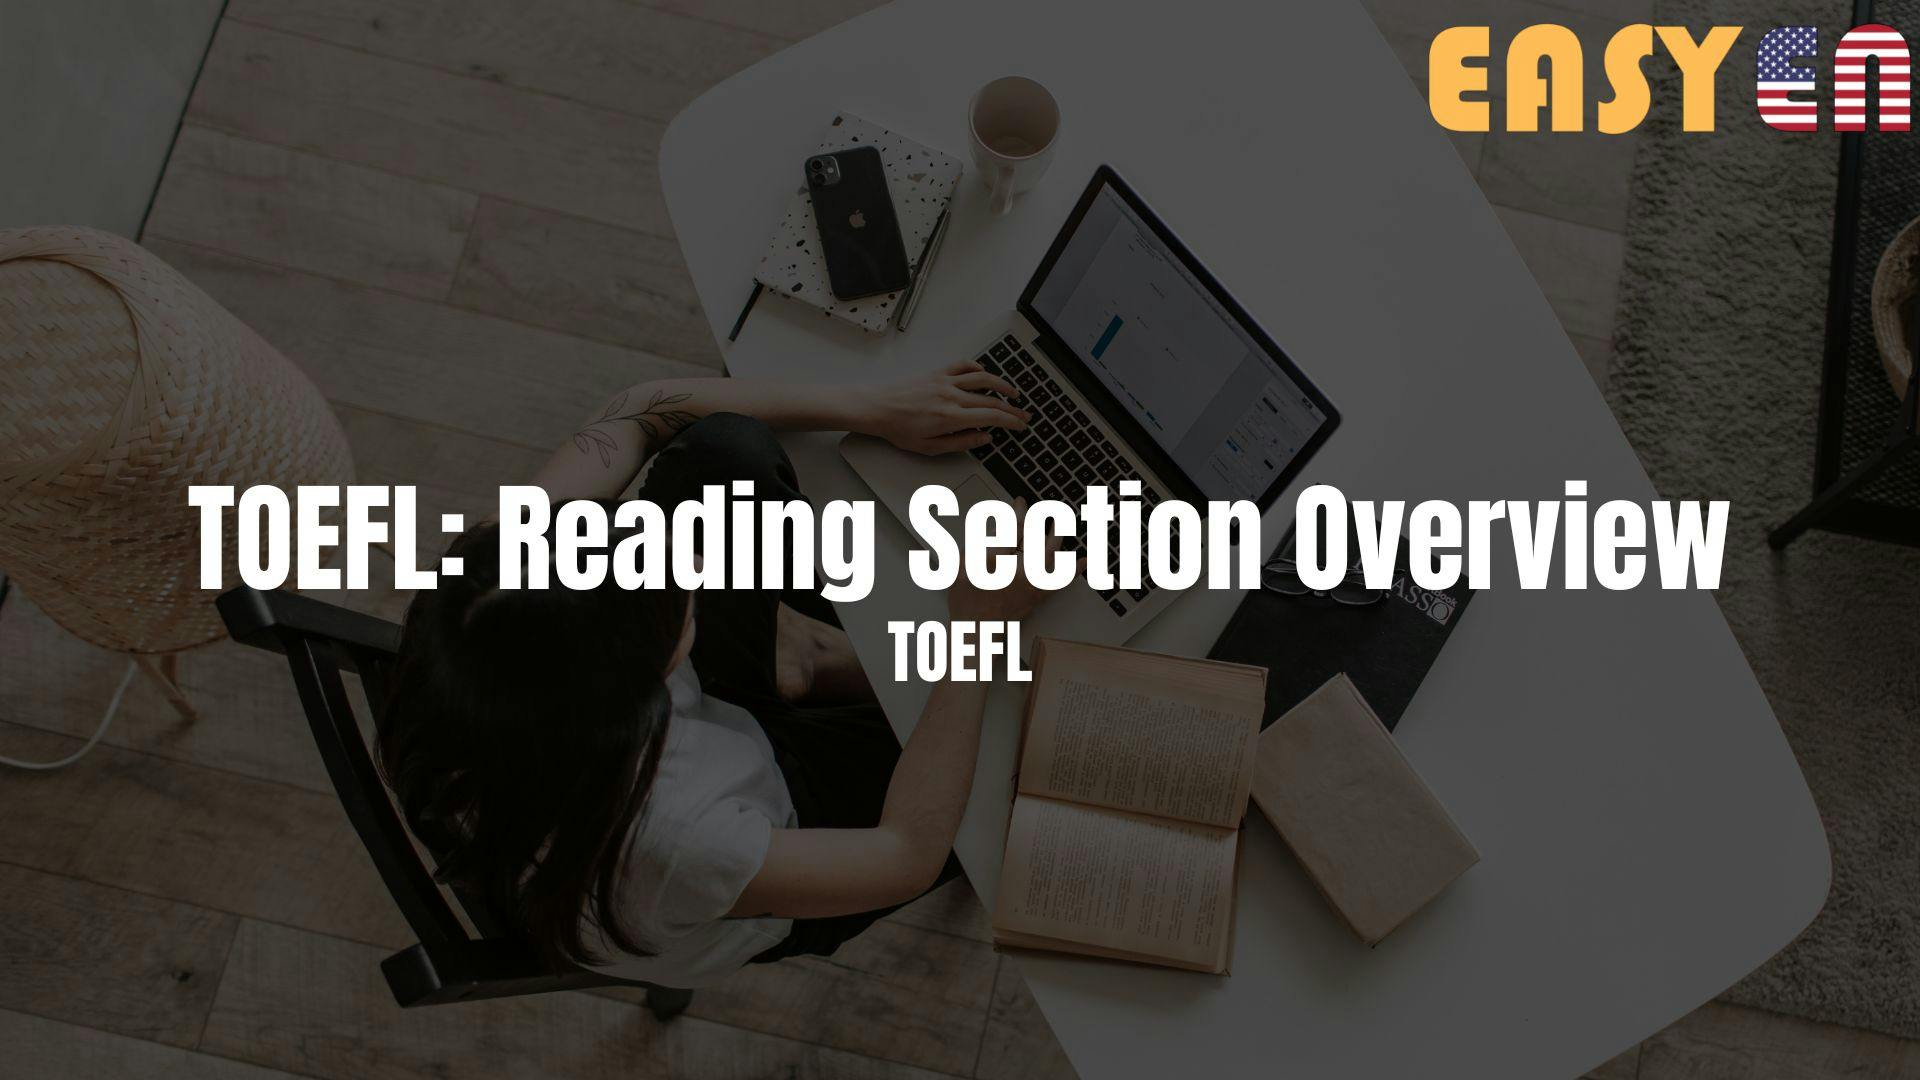 TOEFL: Reading Section Overview